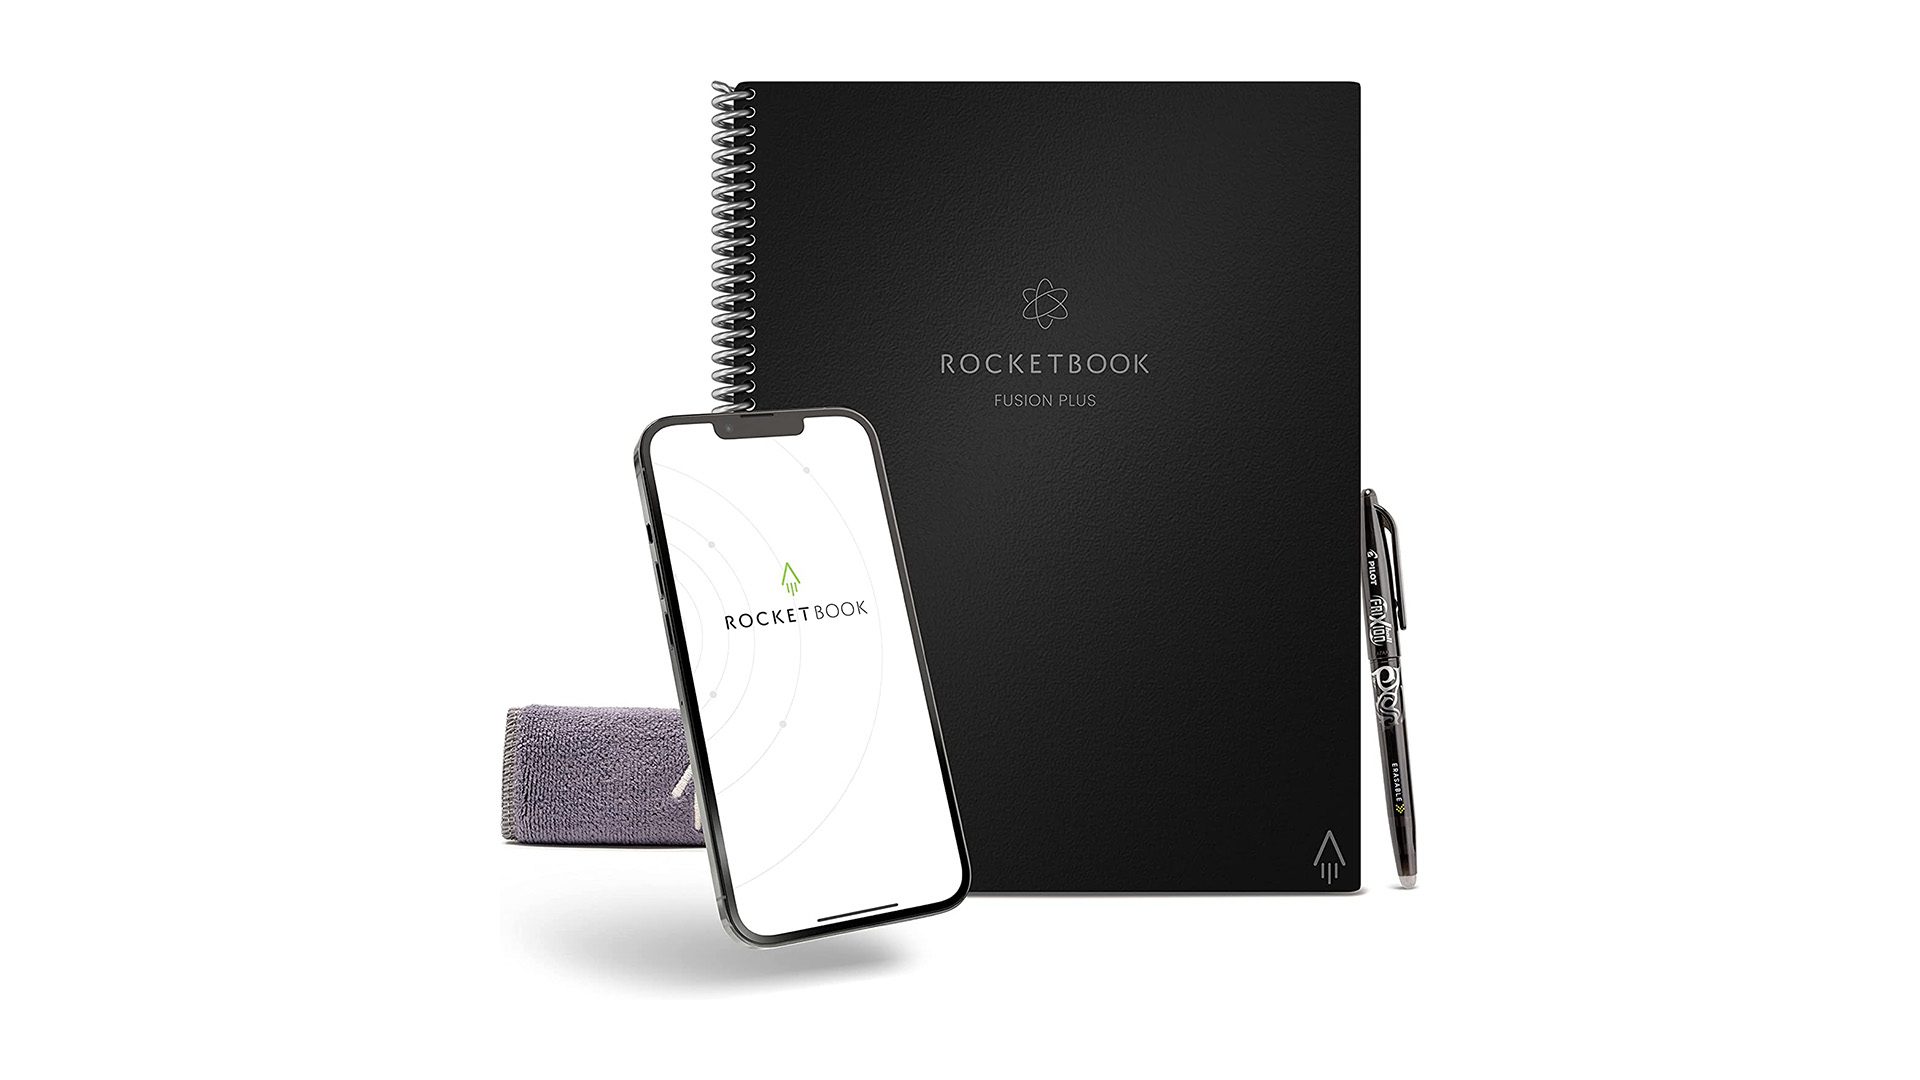 RocketBook's FusionPlus smart notebook and planner